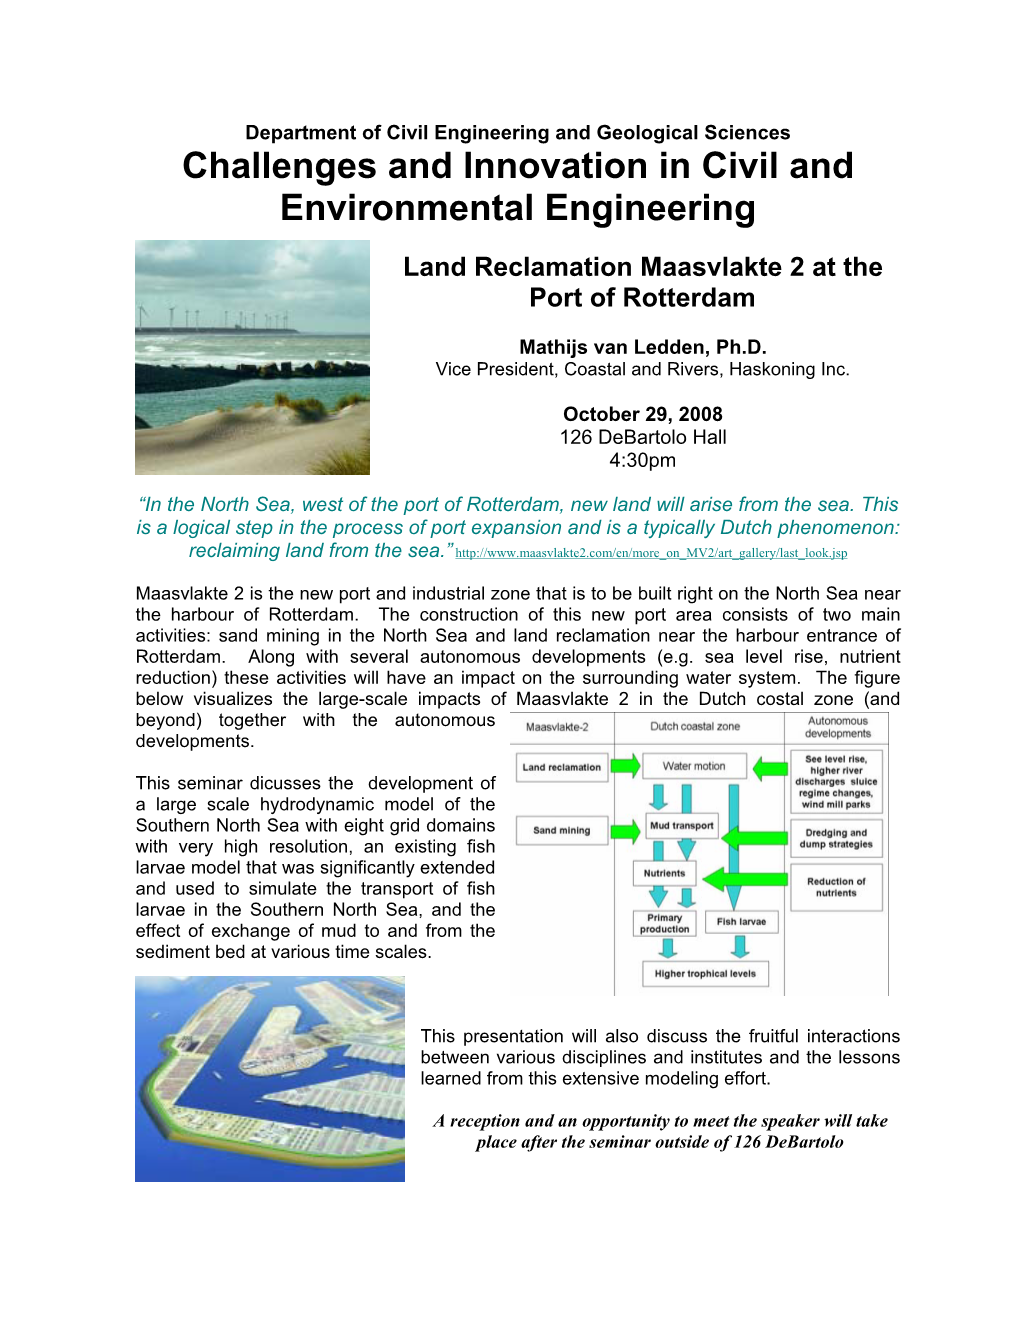 Challenges and Innovation in Civil and Environmental Engineering